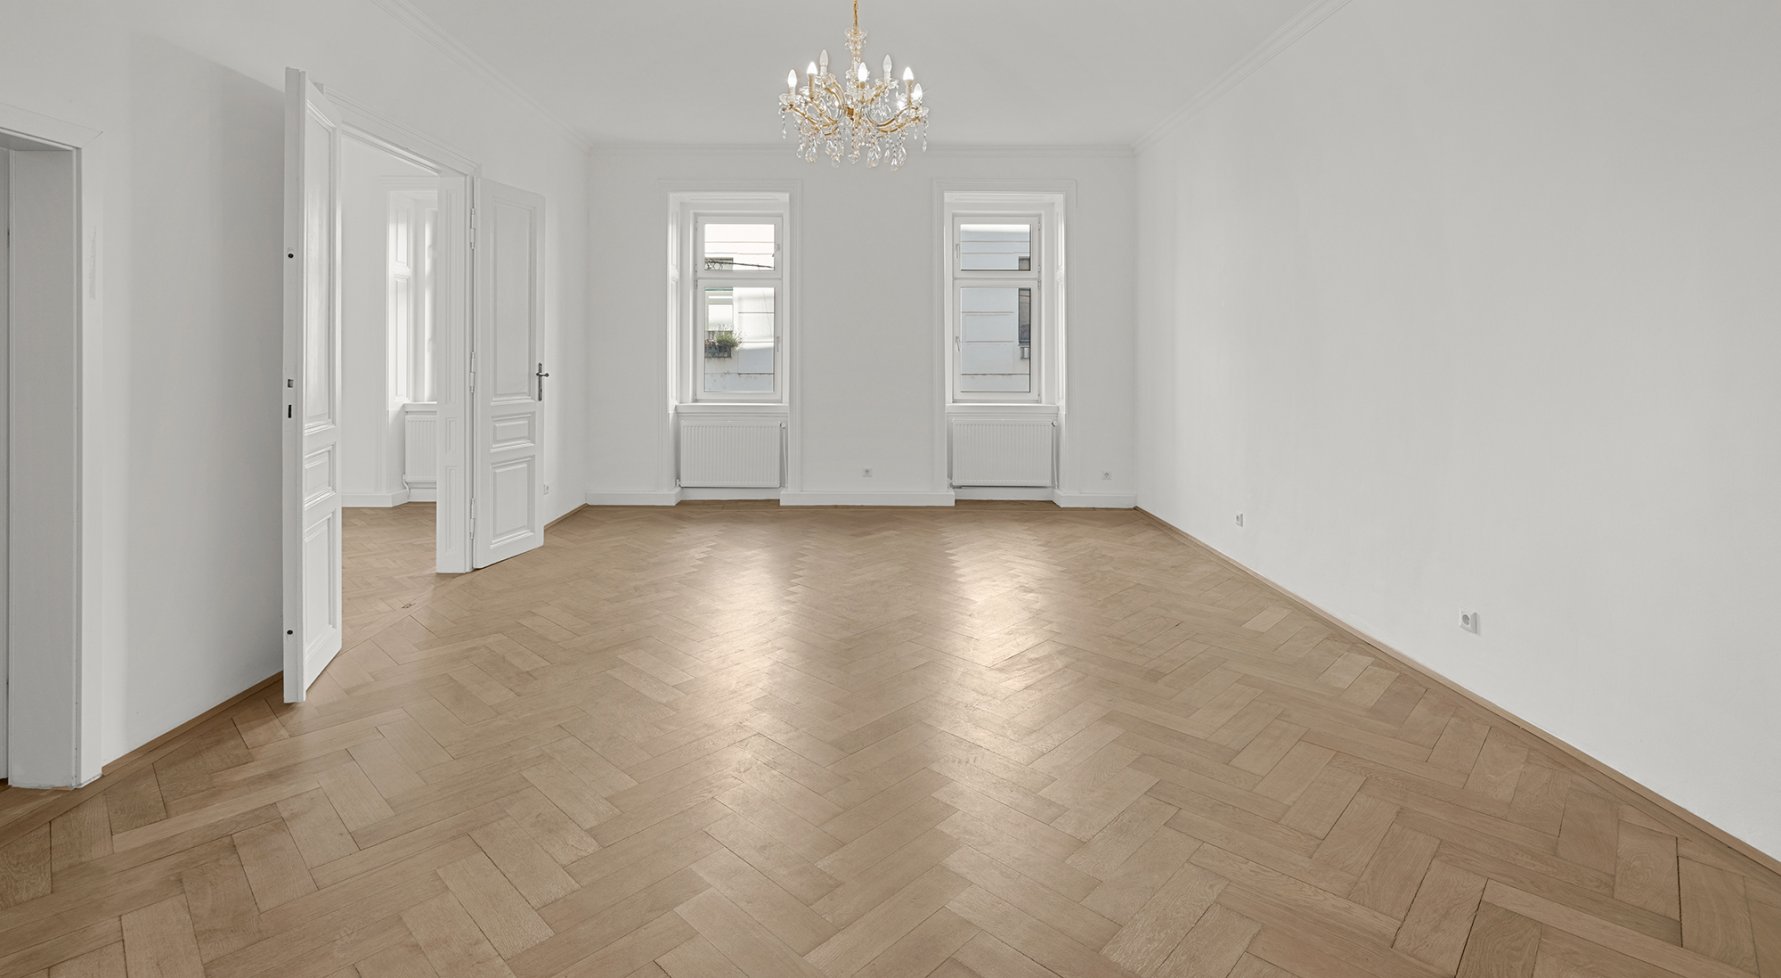 Property in 1150 Wien, 15. Bezirk: Well-lit, renovated 4-bedroom old-build apartment! - picture 1